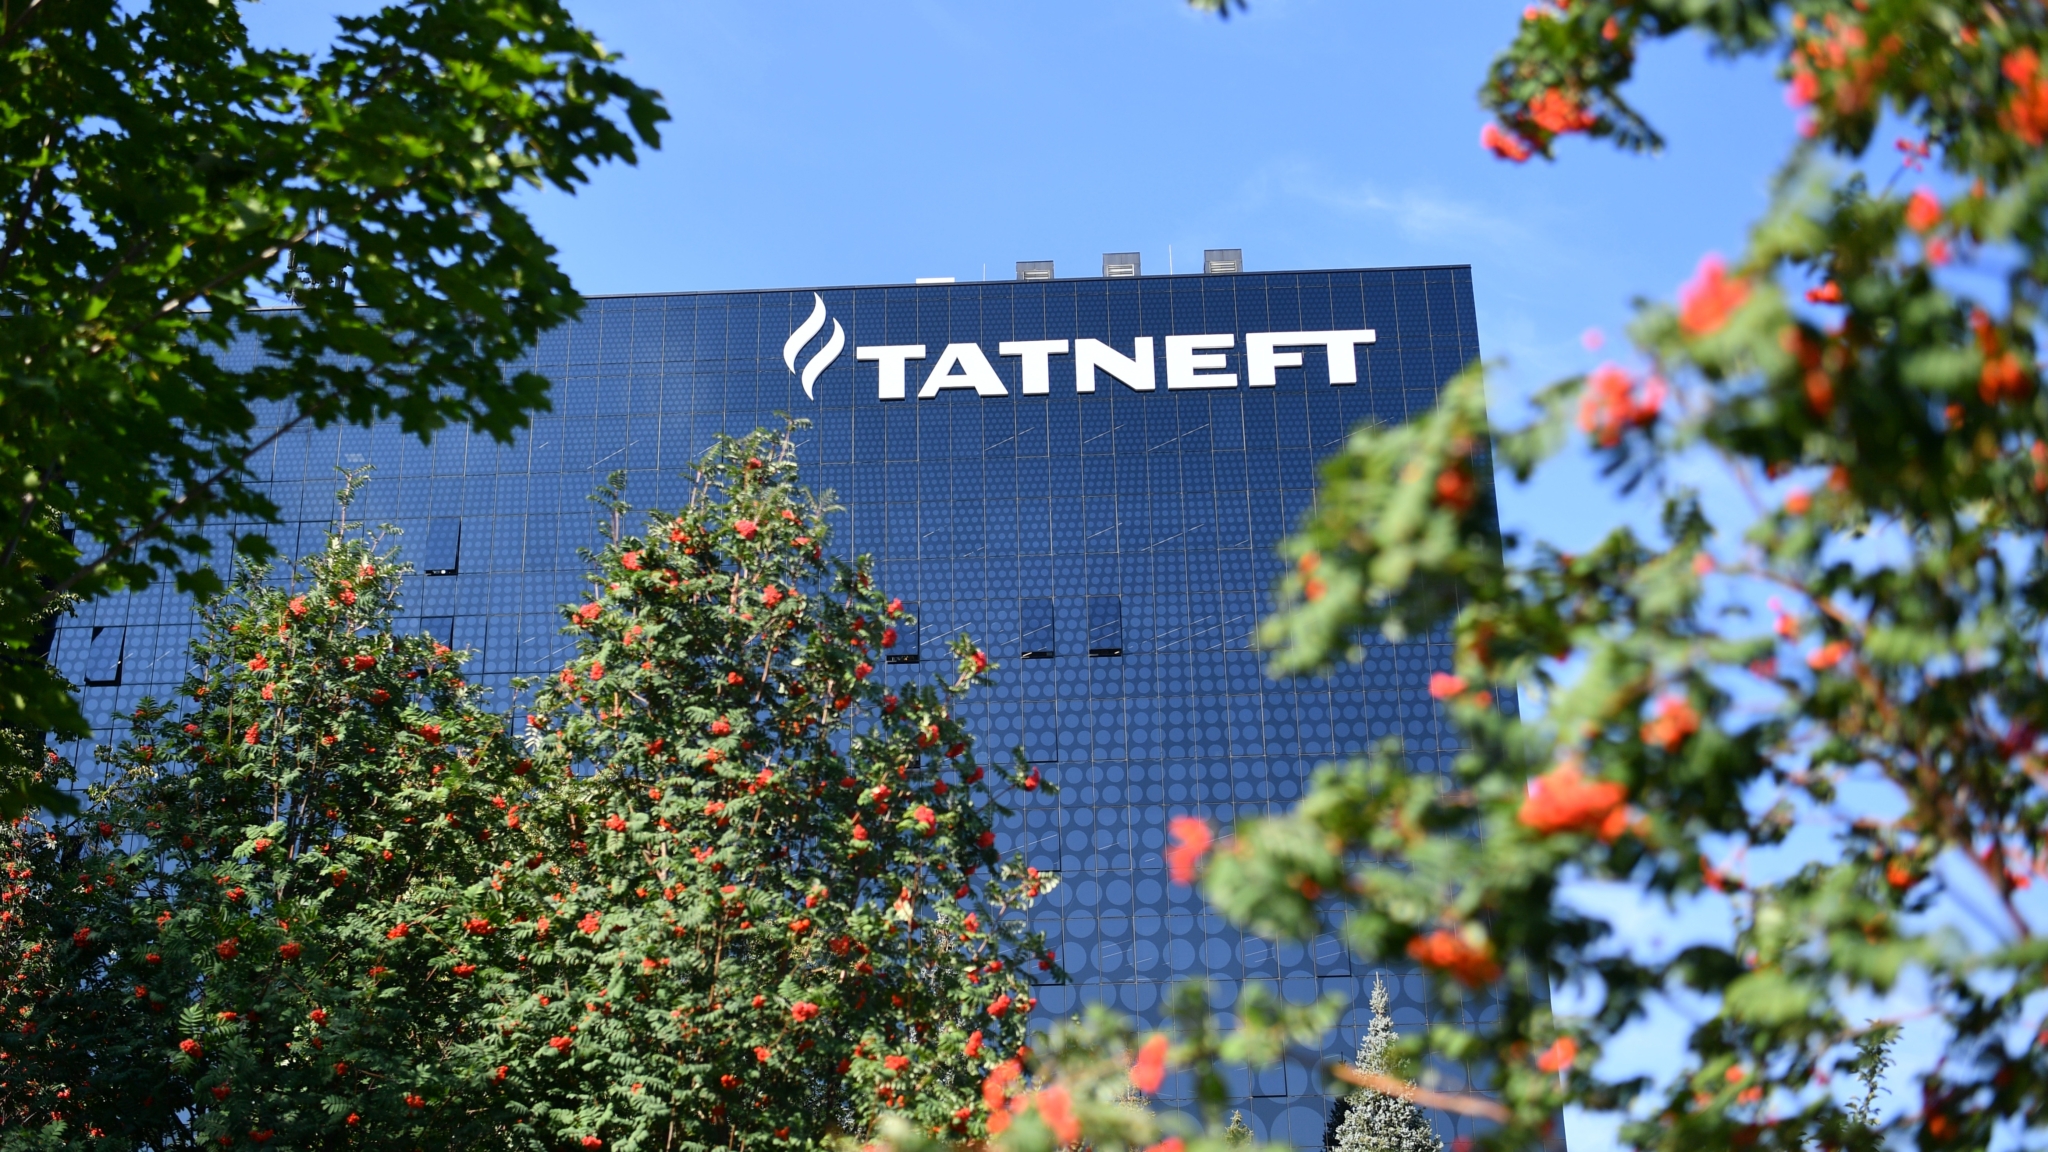 Tatneft paying just 286 million euros for Nokian Tyres Russian assets